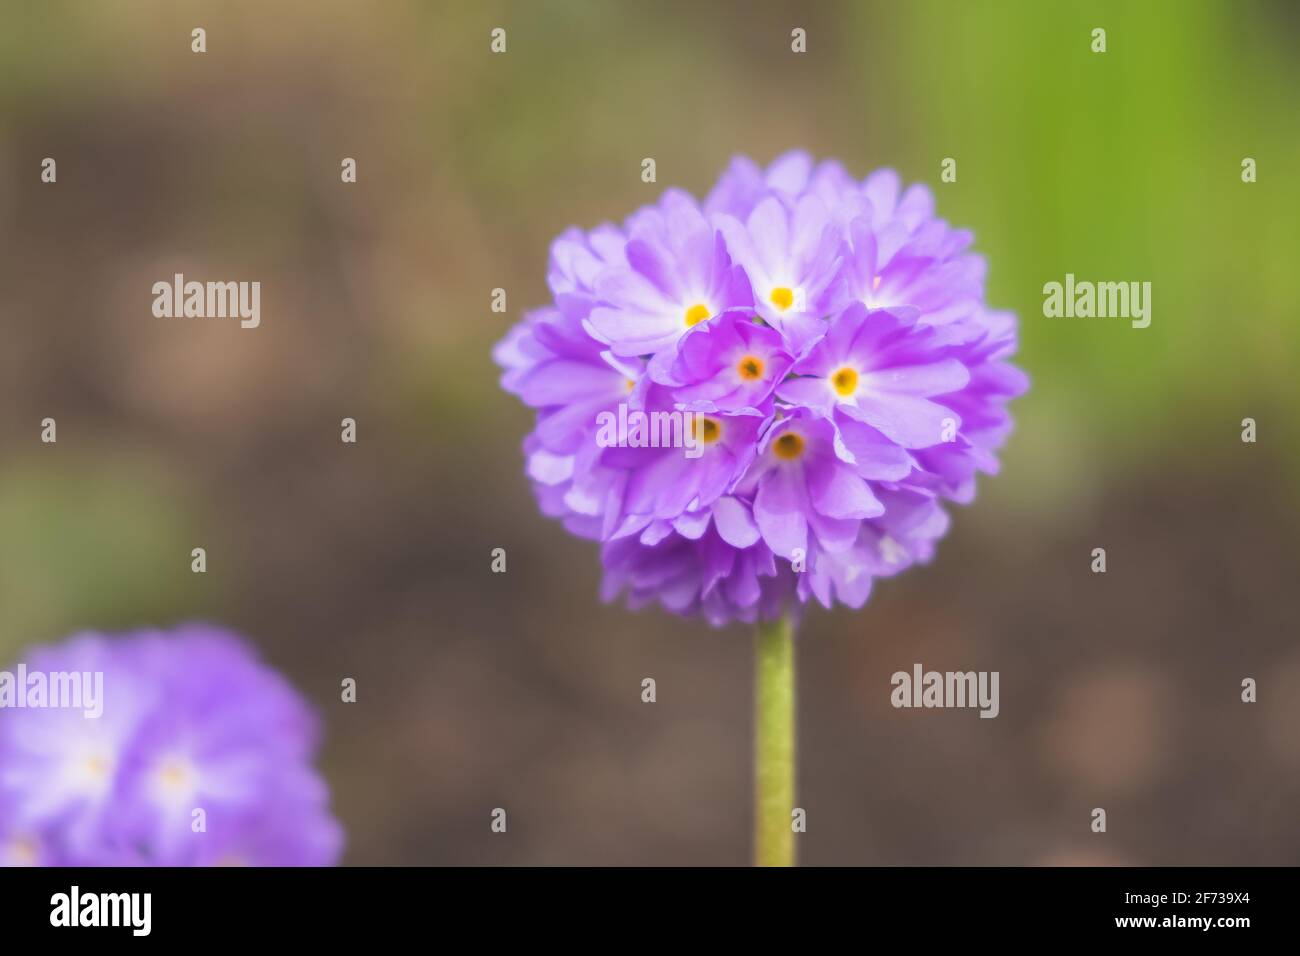 Selective focus close-up detail of a delicate purple Primula denticulata flower in Spring. Stock Photo